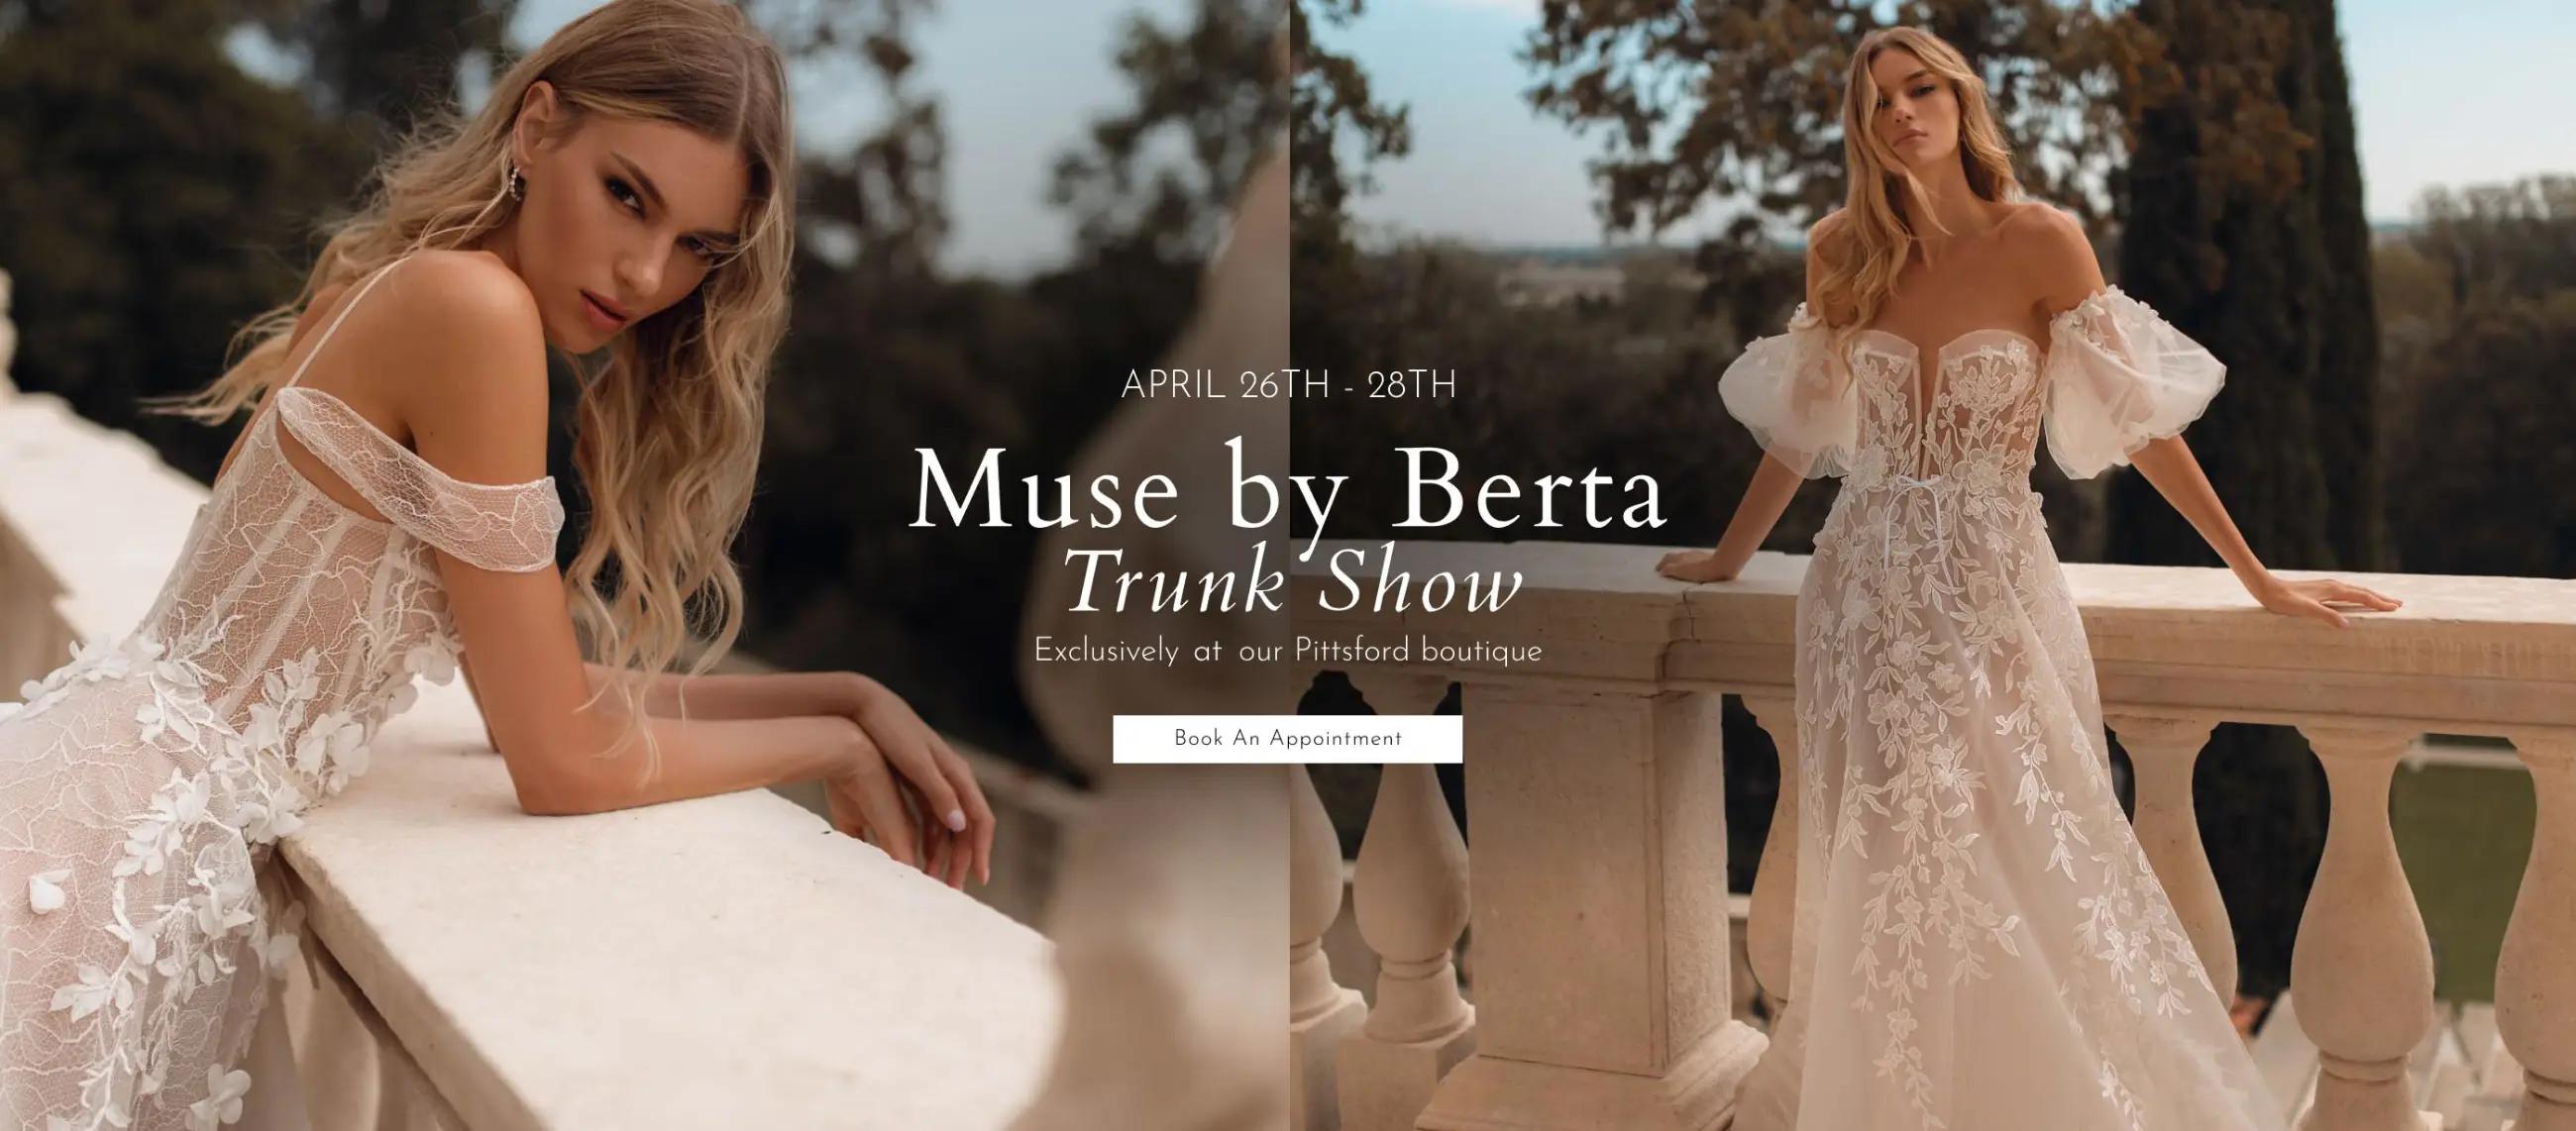 MUSE BY BERTA Trunk Show